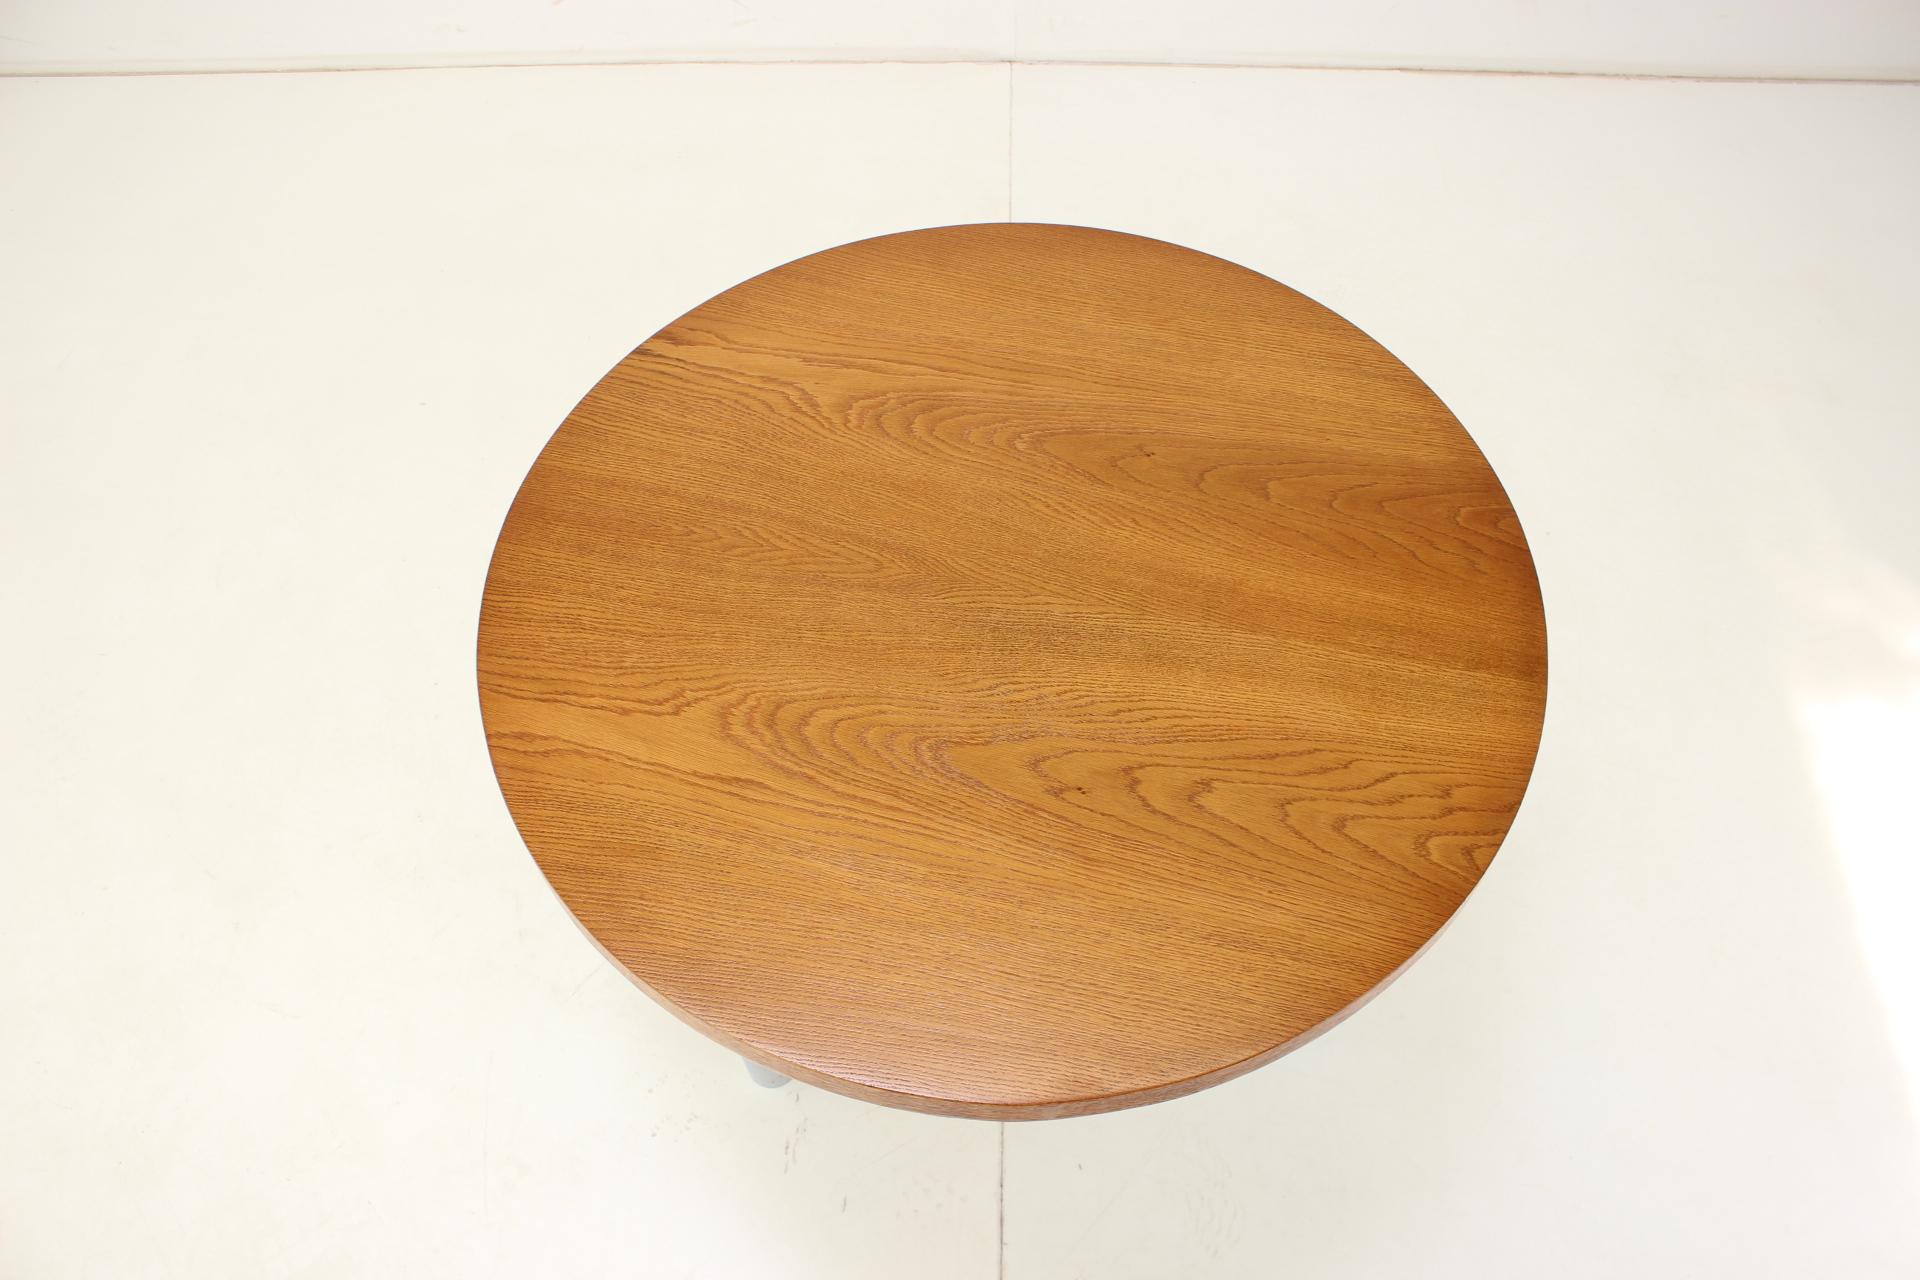 Mid-20th Century Conference Table by Kovona, 1960s / Czechoslovakia For Sale